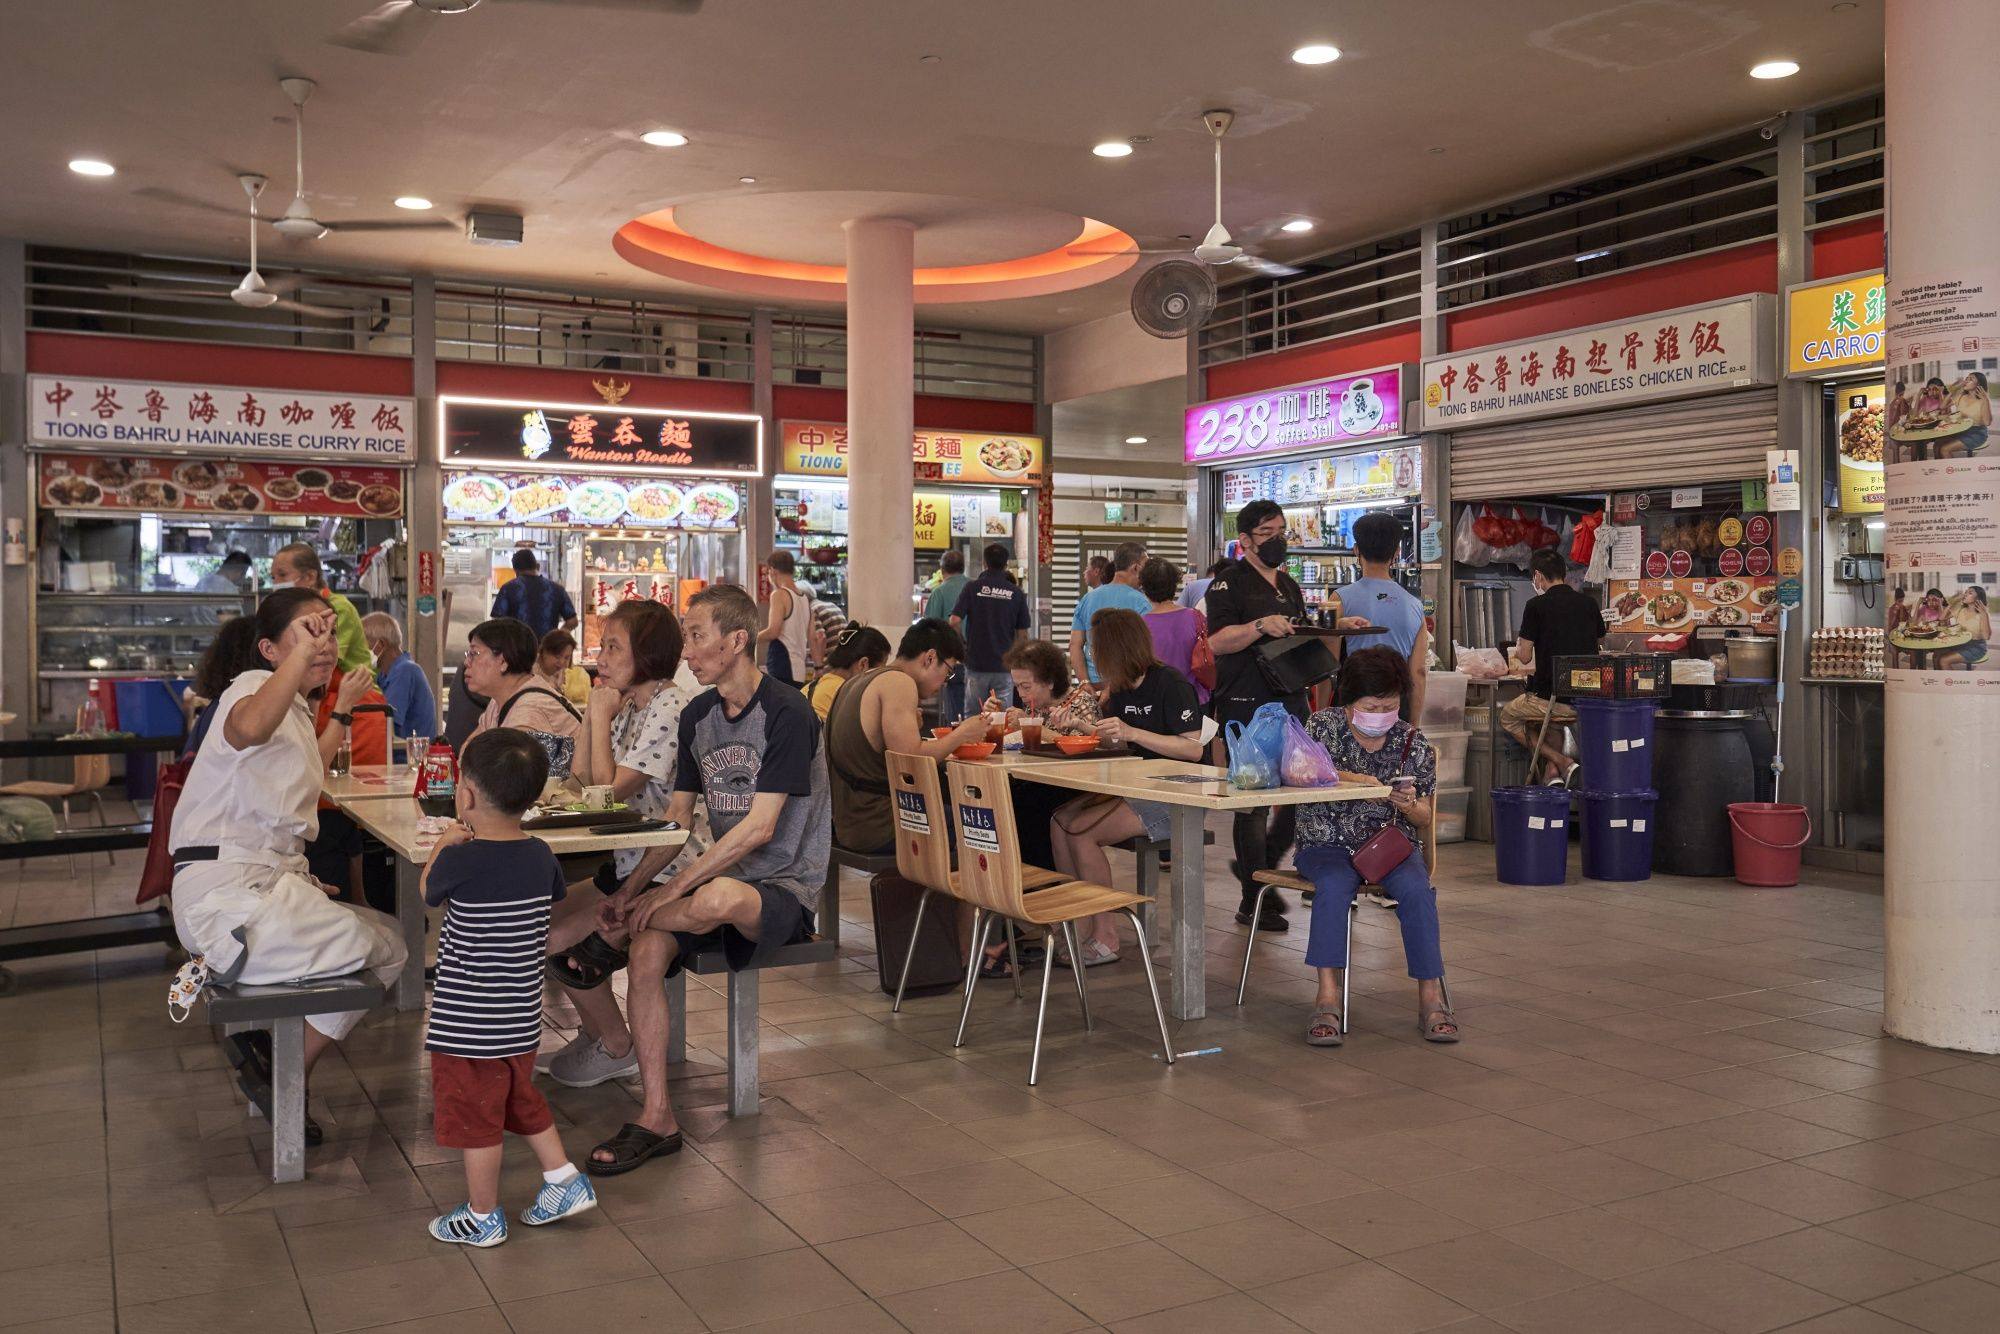 Best Food Stalls to try in Tiong Bahru Market Hawker Center